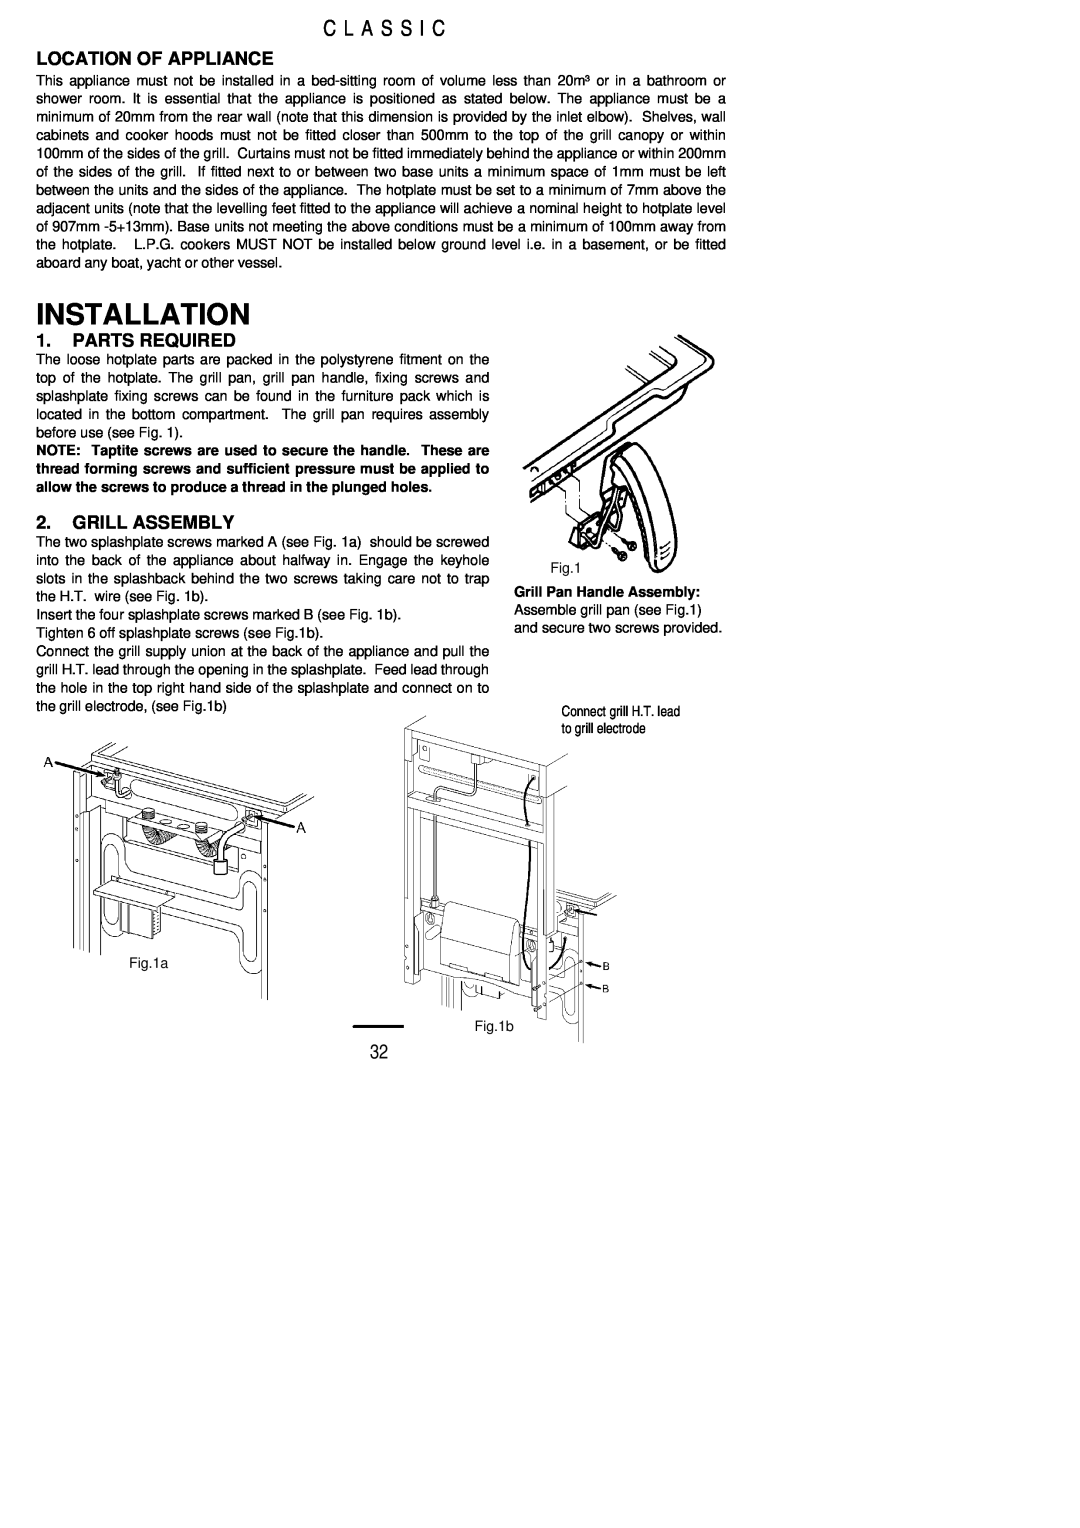 Parkinson Cowan U02021 Installation, C L A S S I C, Location Of Appliance, Parts Required, Grill Assembly 